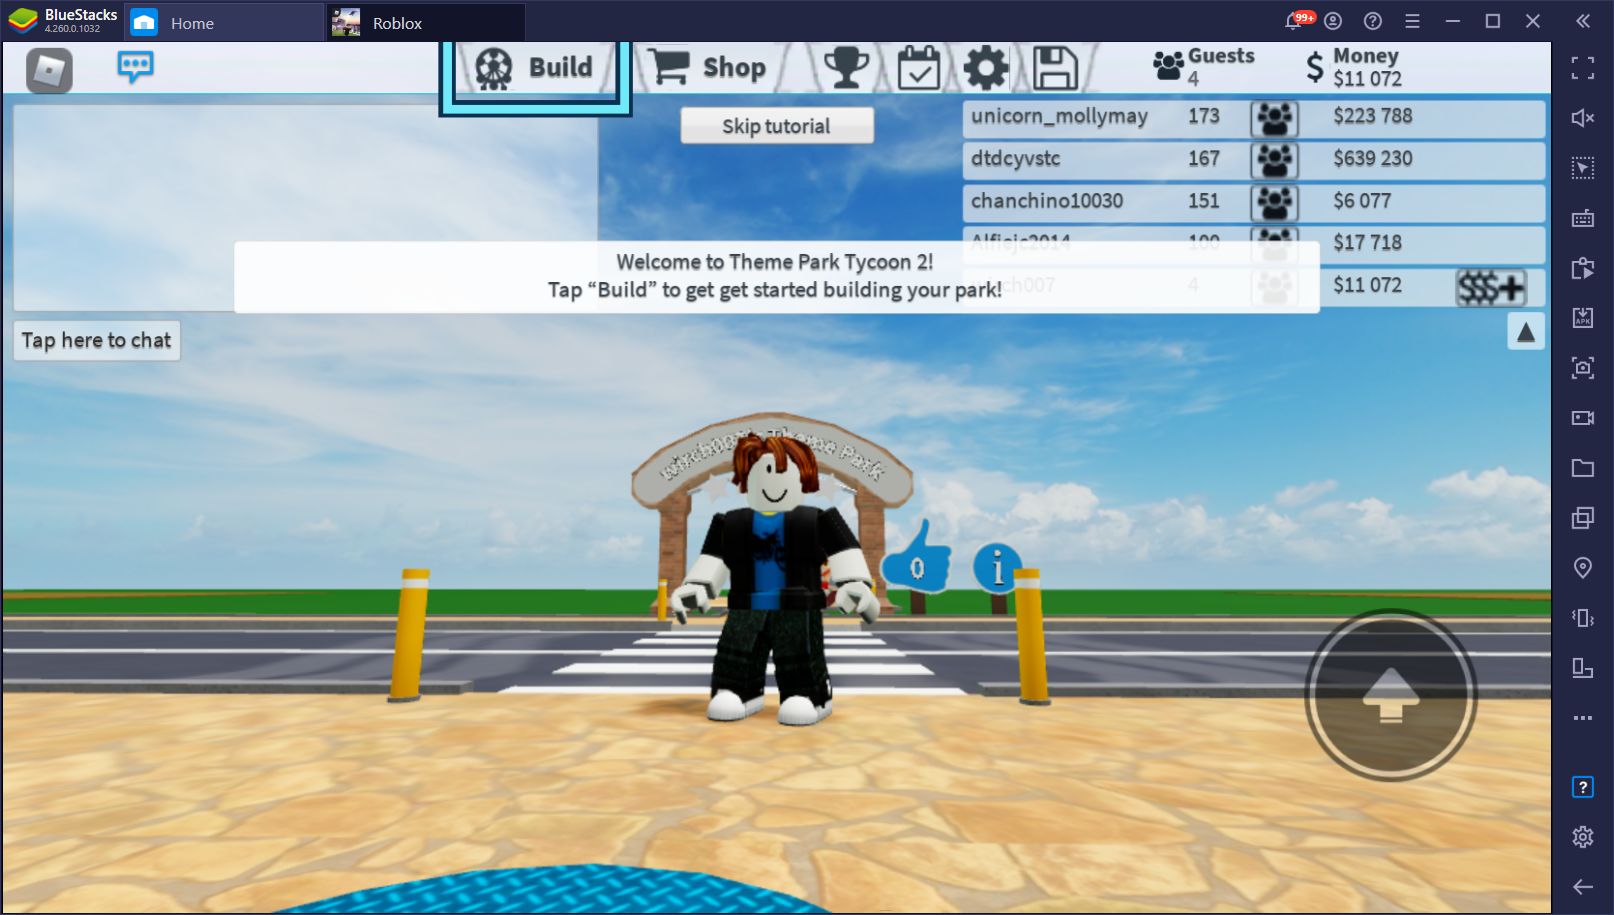 The Best Roblox Games To Play In 2021 Bluestacks - theme park tycoon 2 roblox script